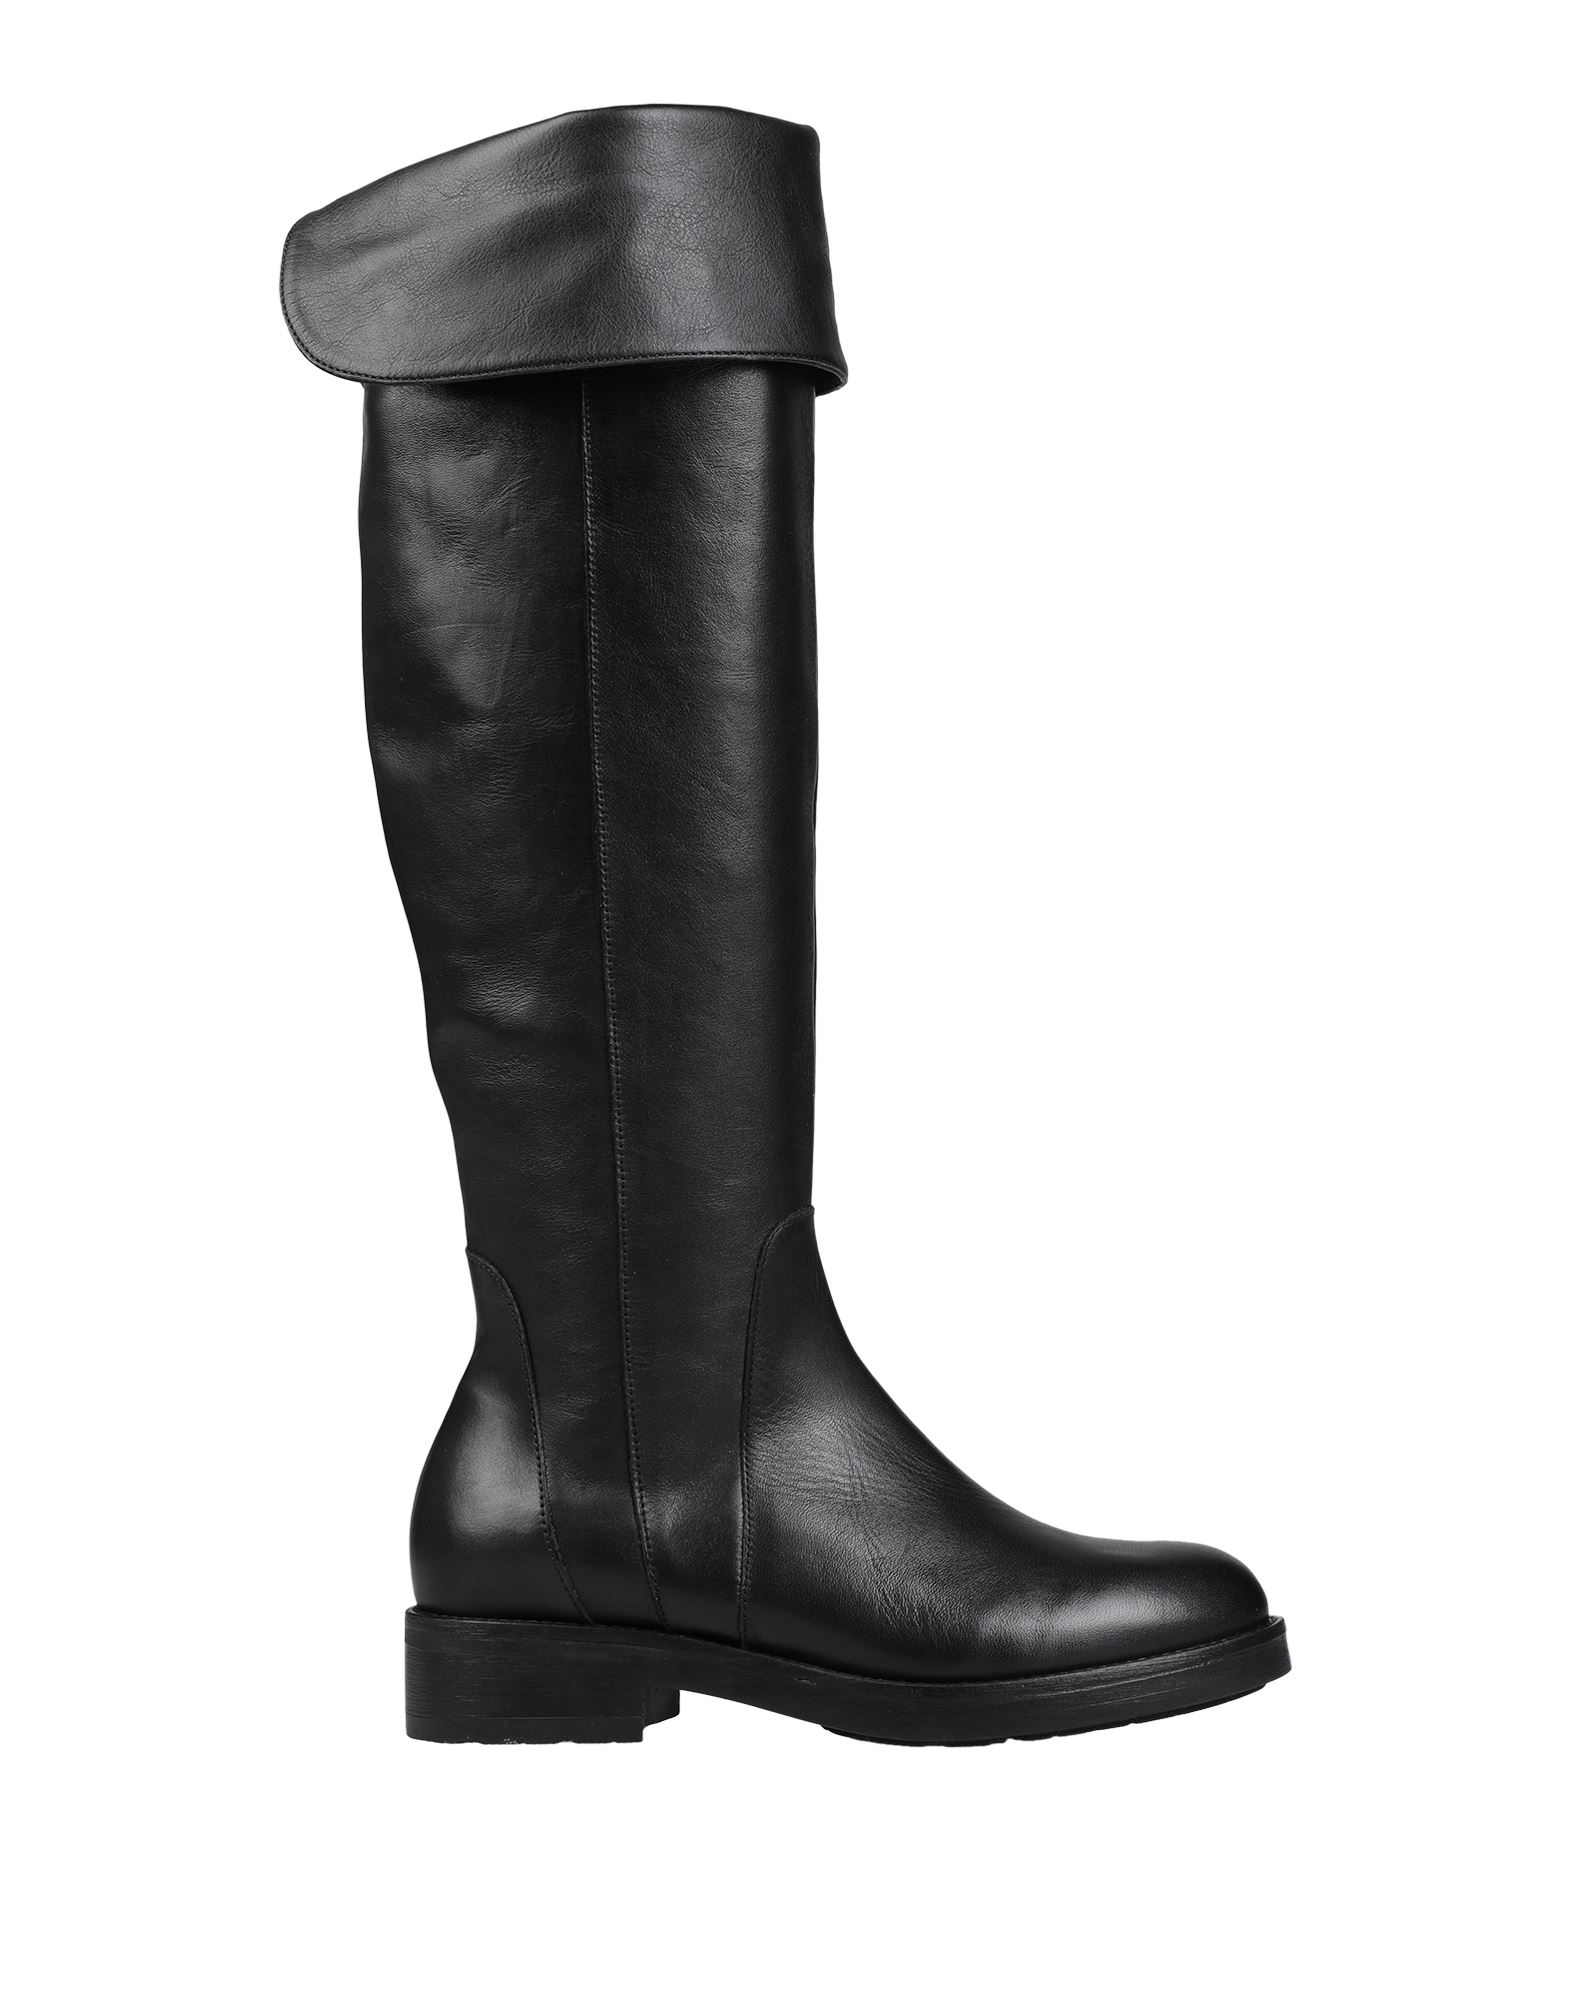 FORMENTINI Knee boots